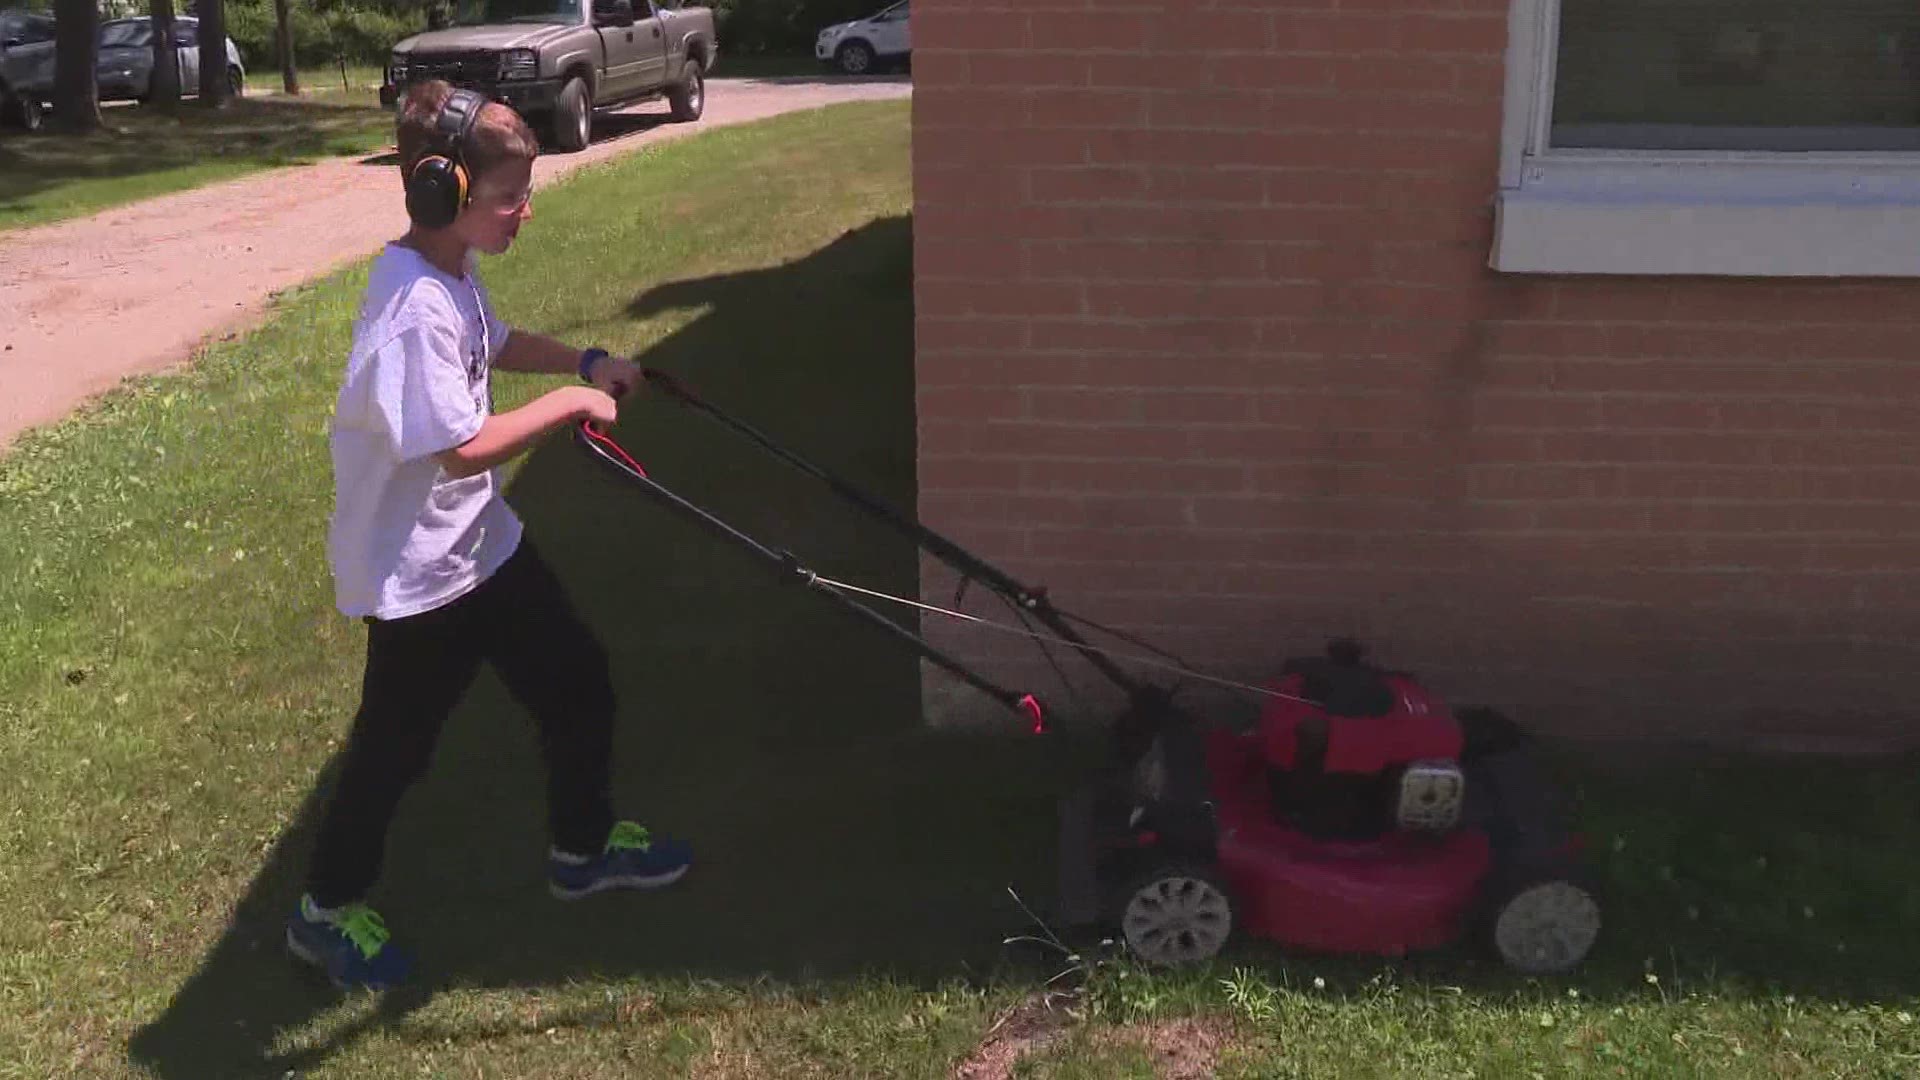 JR Achterhoff has embarked on quite the summer side-gig. He's accepted the challenge offered by a nationwide nonprofit organization to mow 50 lawns this summer.